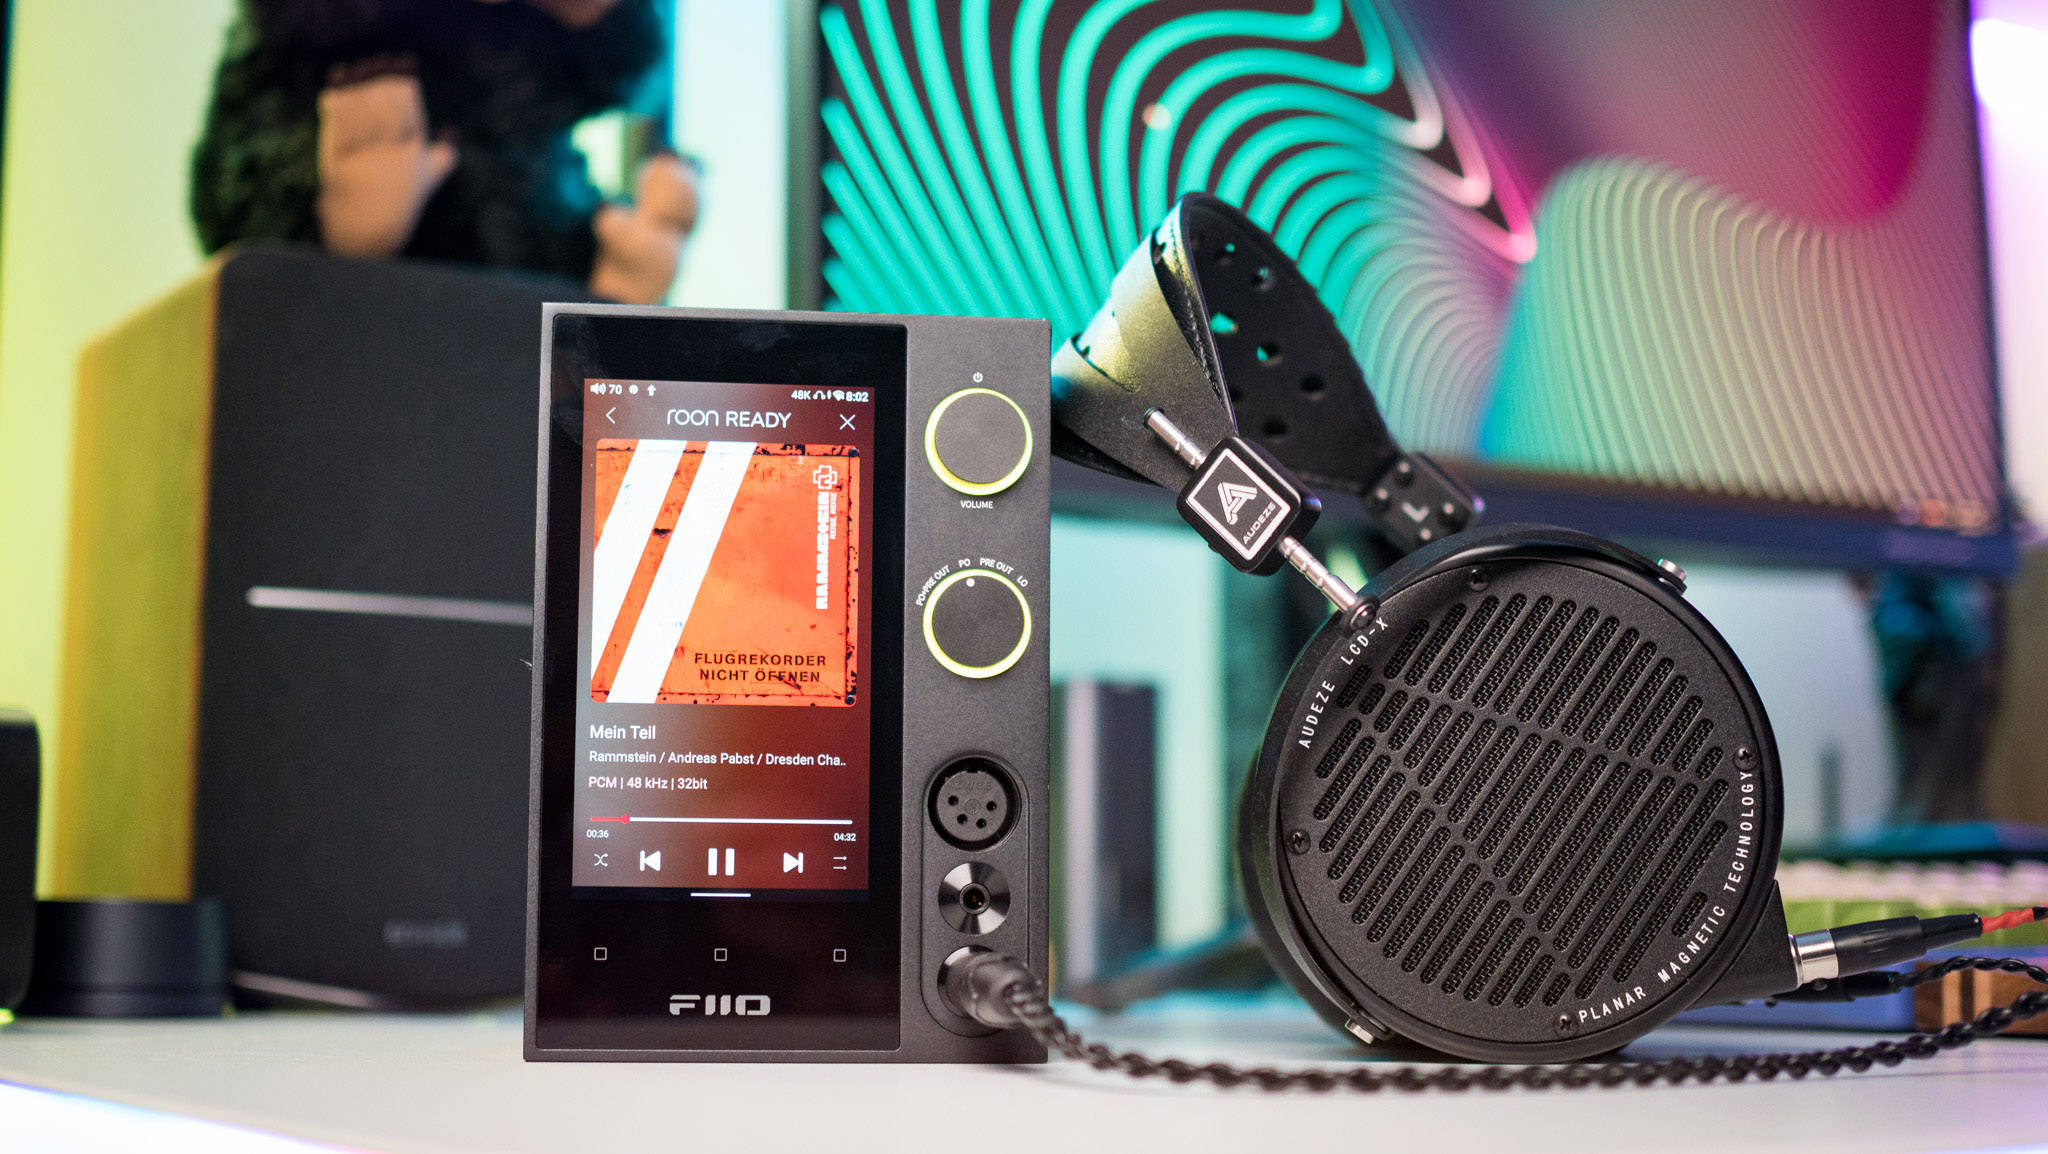 Audeze LCD-X connected to Fiio R7 with Rammstein's album on the screen